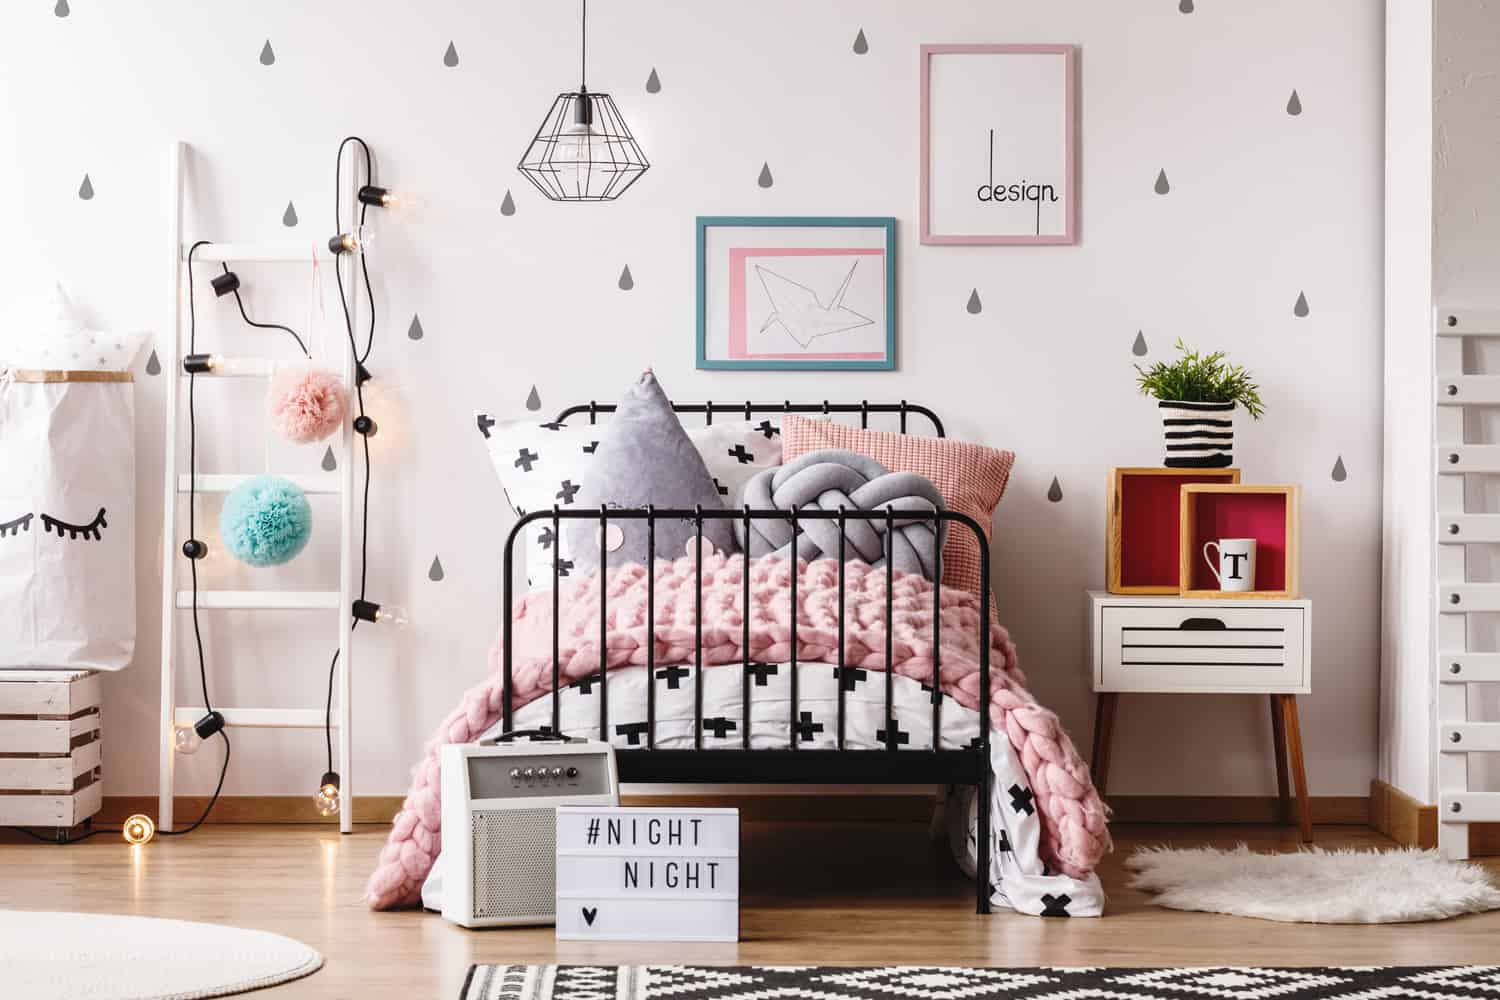 White ladder with pompons next to bed with shaped pillow in pastel child's bedroom with rugs